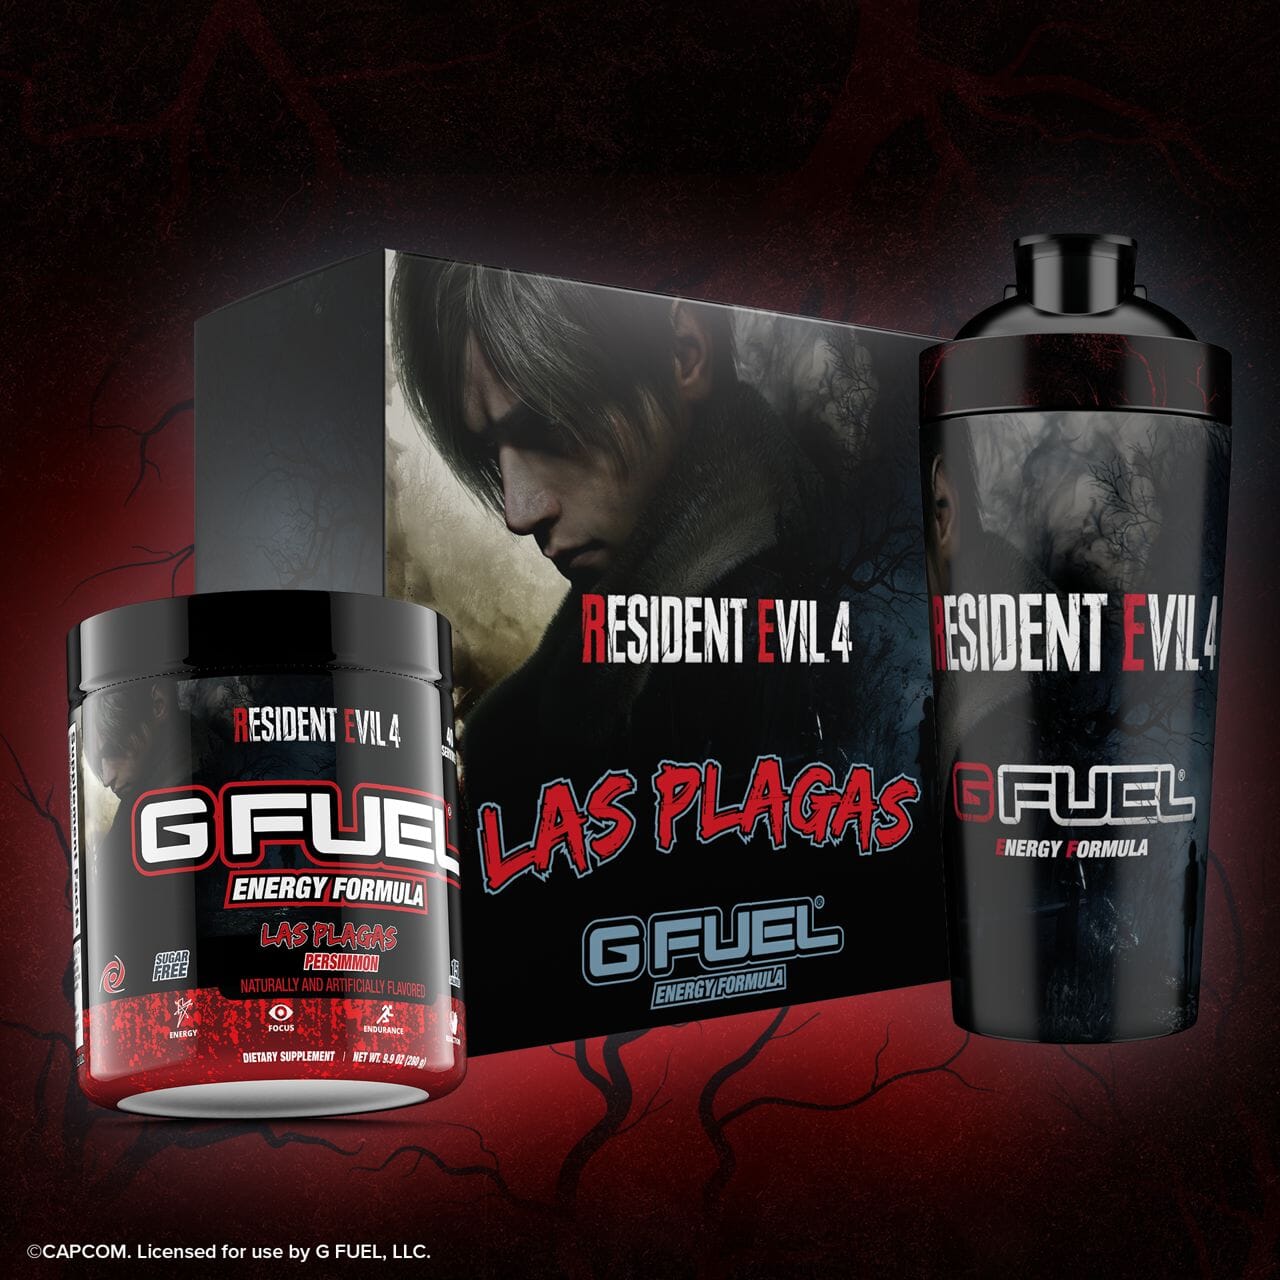 G FUEL's Las Plagas Collector's Box, inspired by "Resident Evil 4"